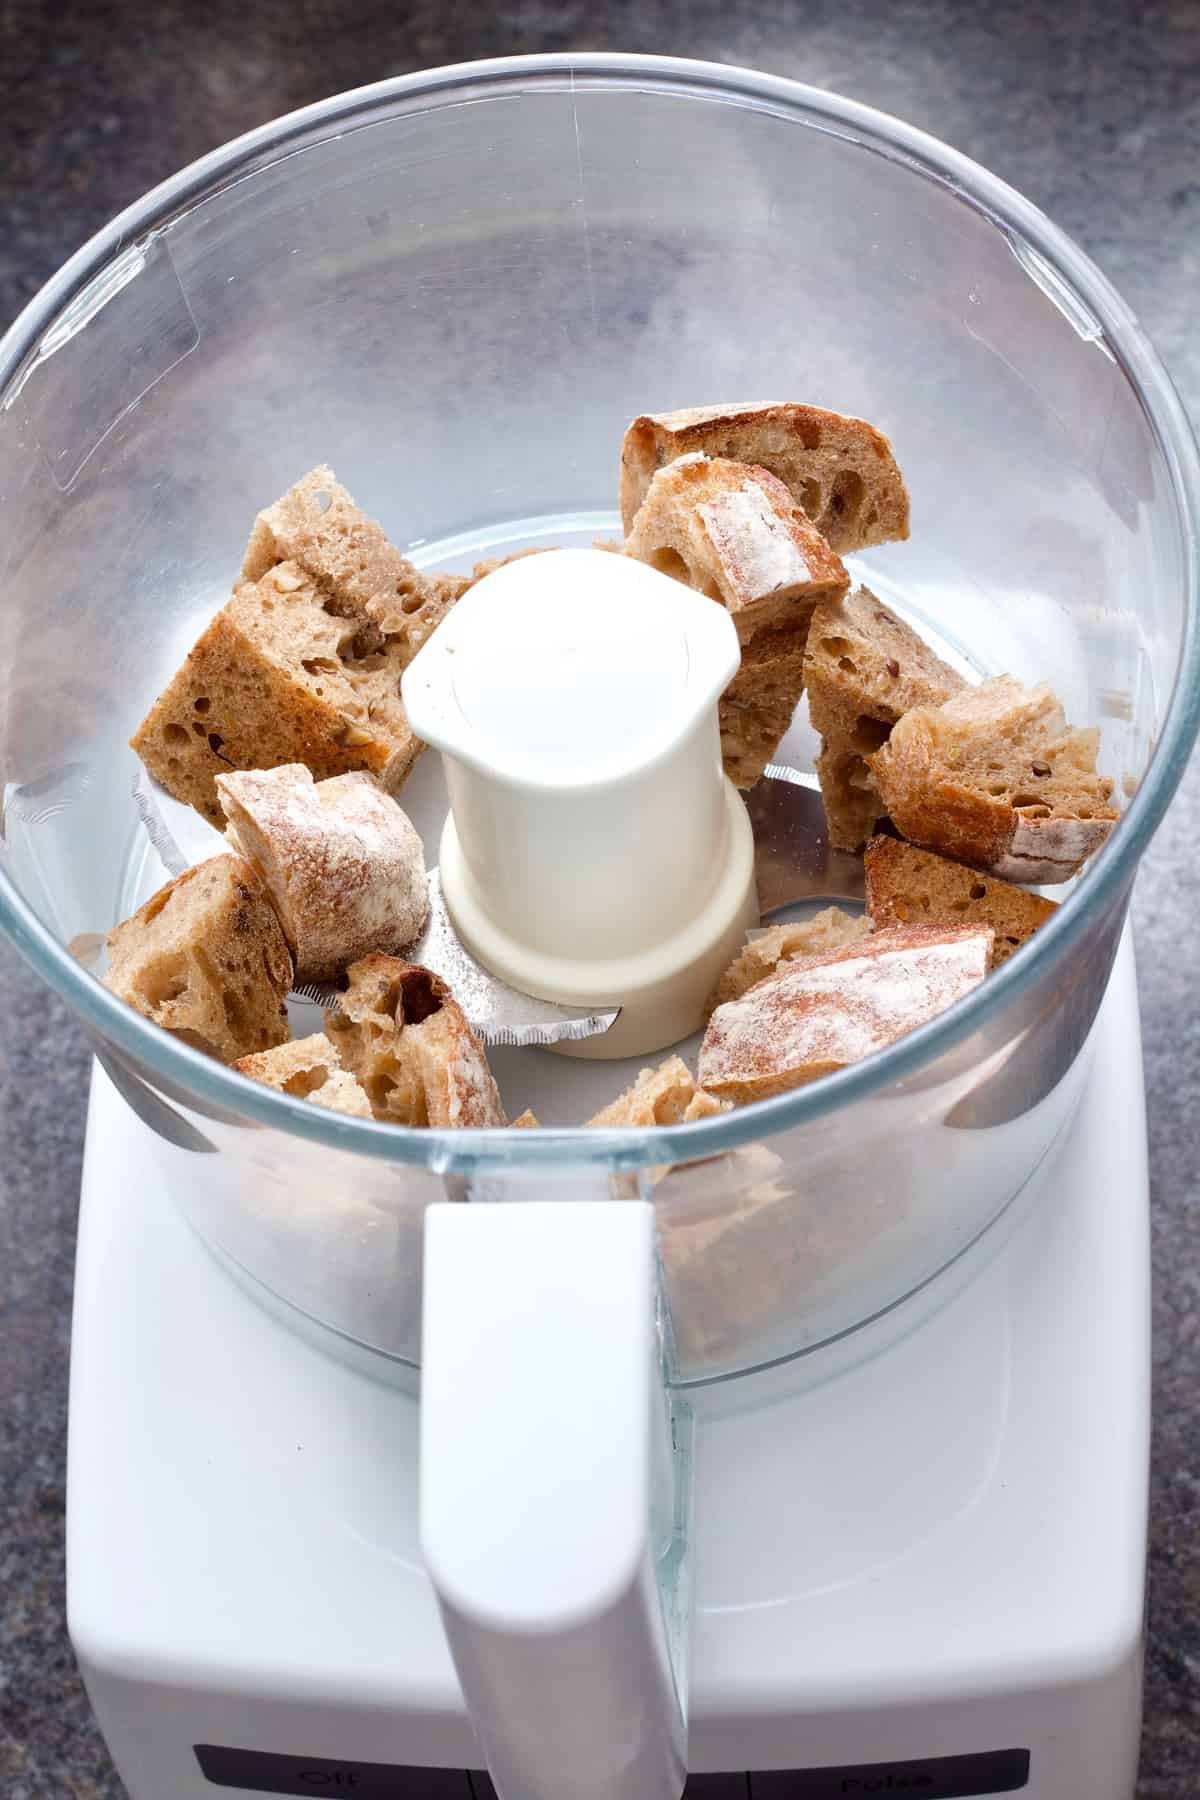 Cubes of bread in a food processor.